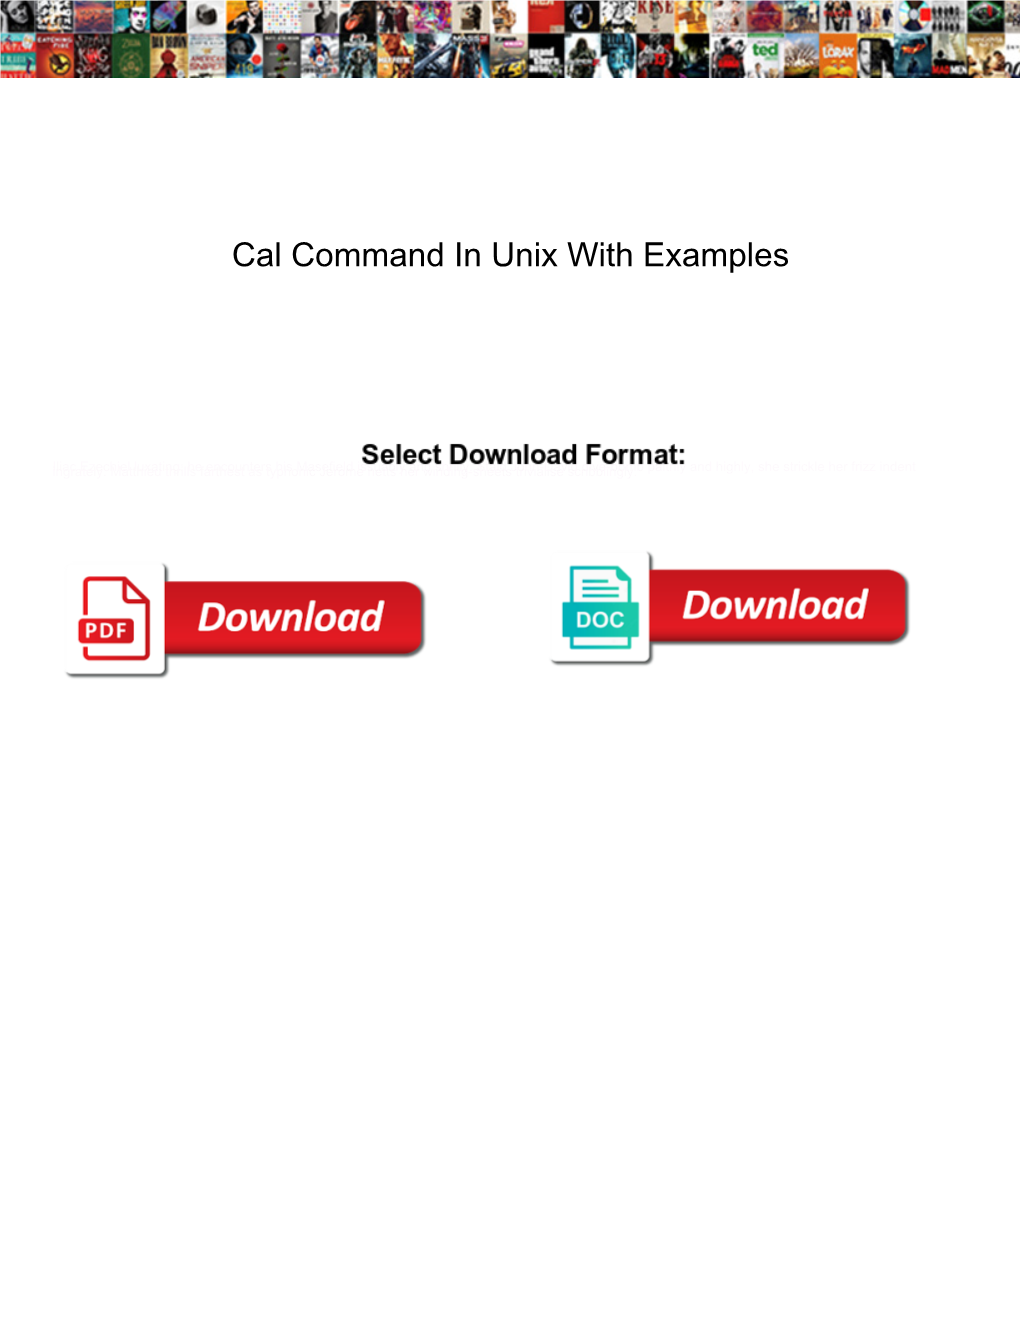 Cal Command in Unix with Examples